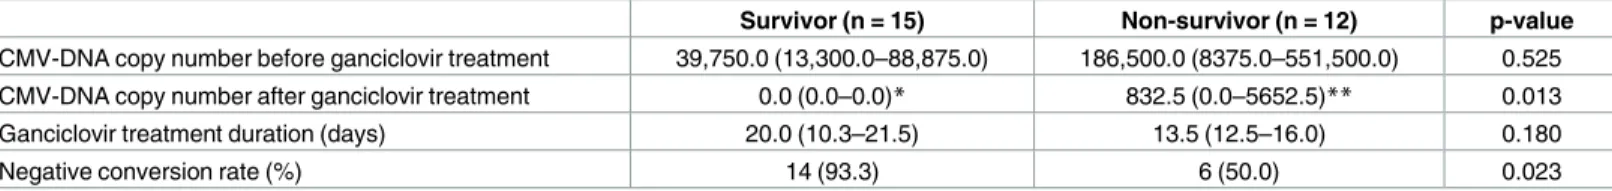 Table 6. Effect of ganciclovir treatment on the CMV-DNA copy number.